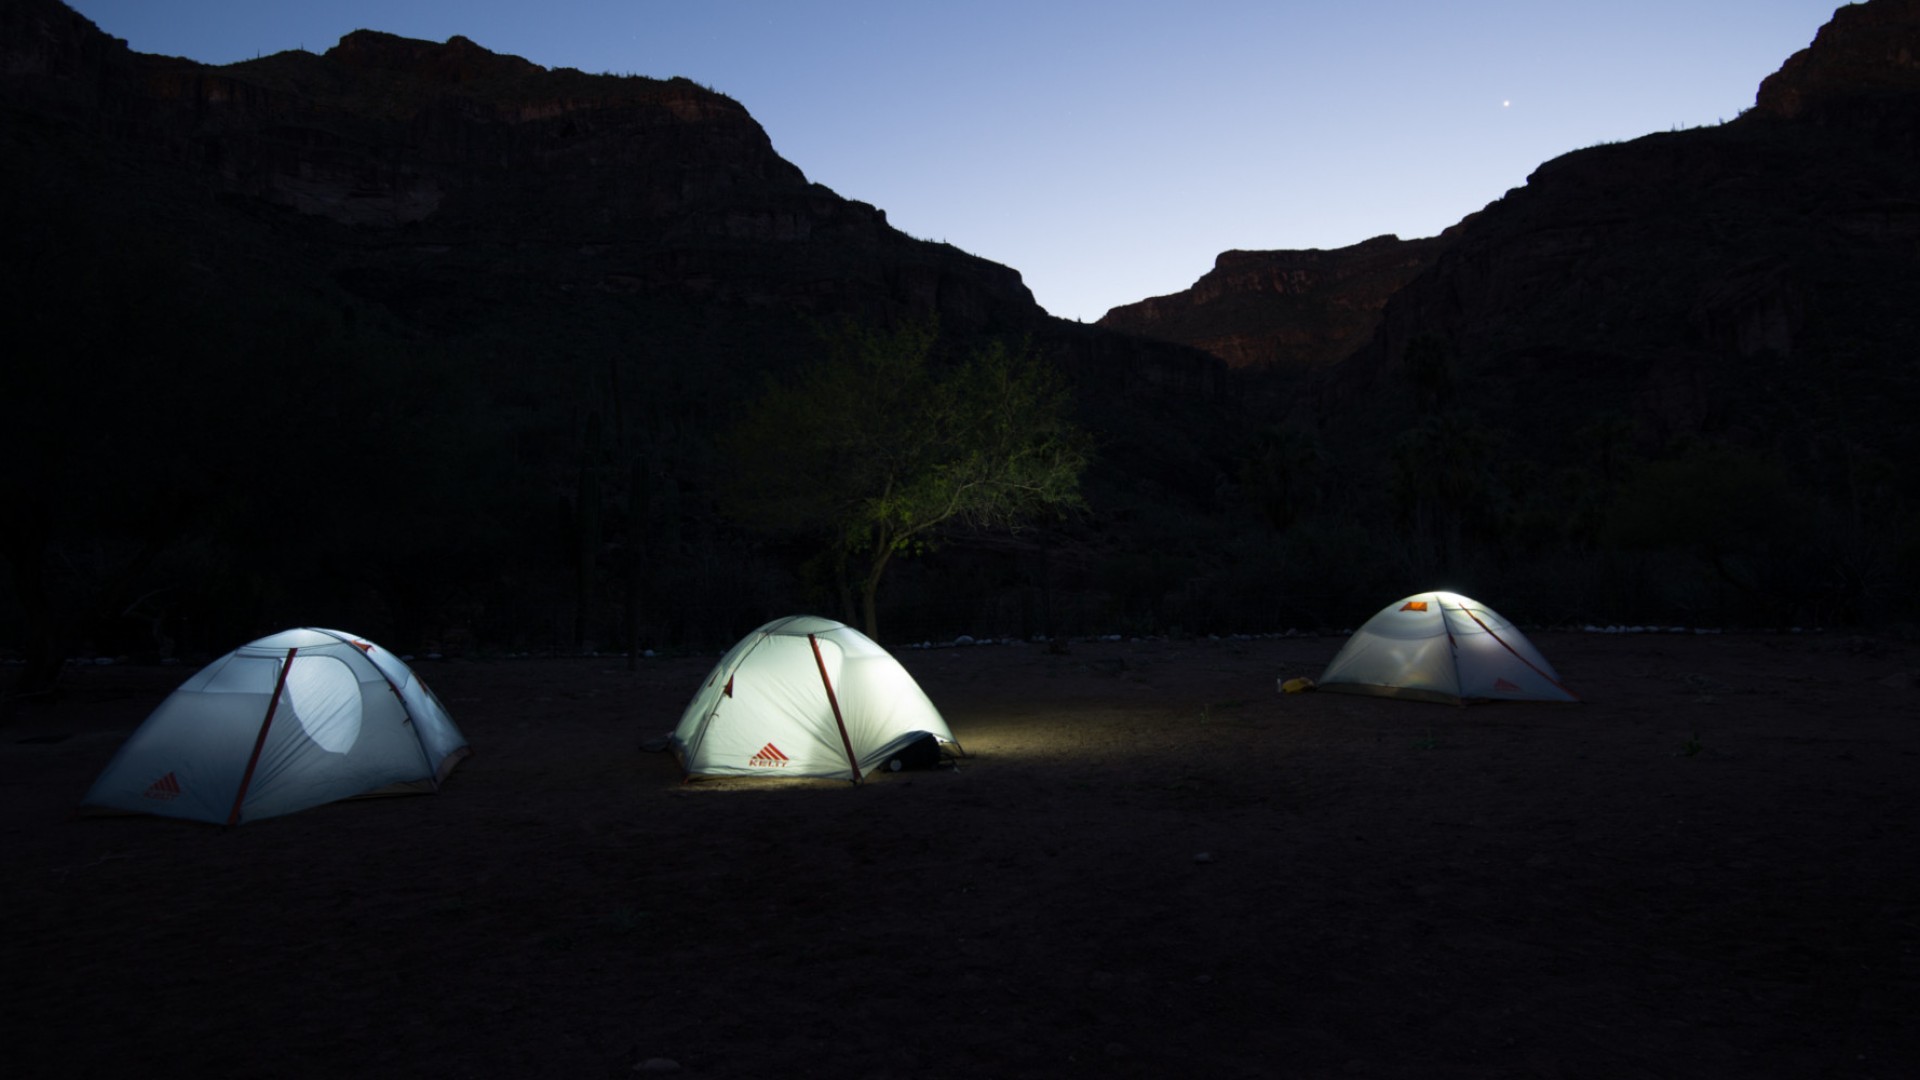 Night view of a campsite in Bajas interior desert mountains